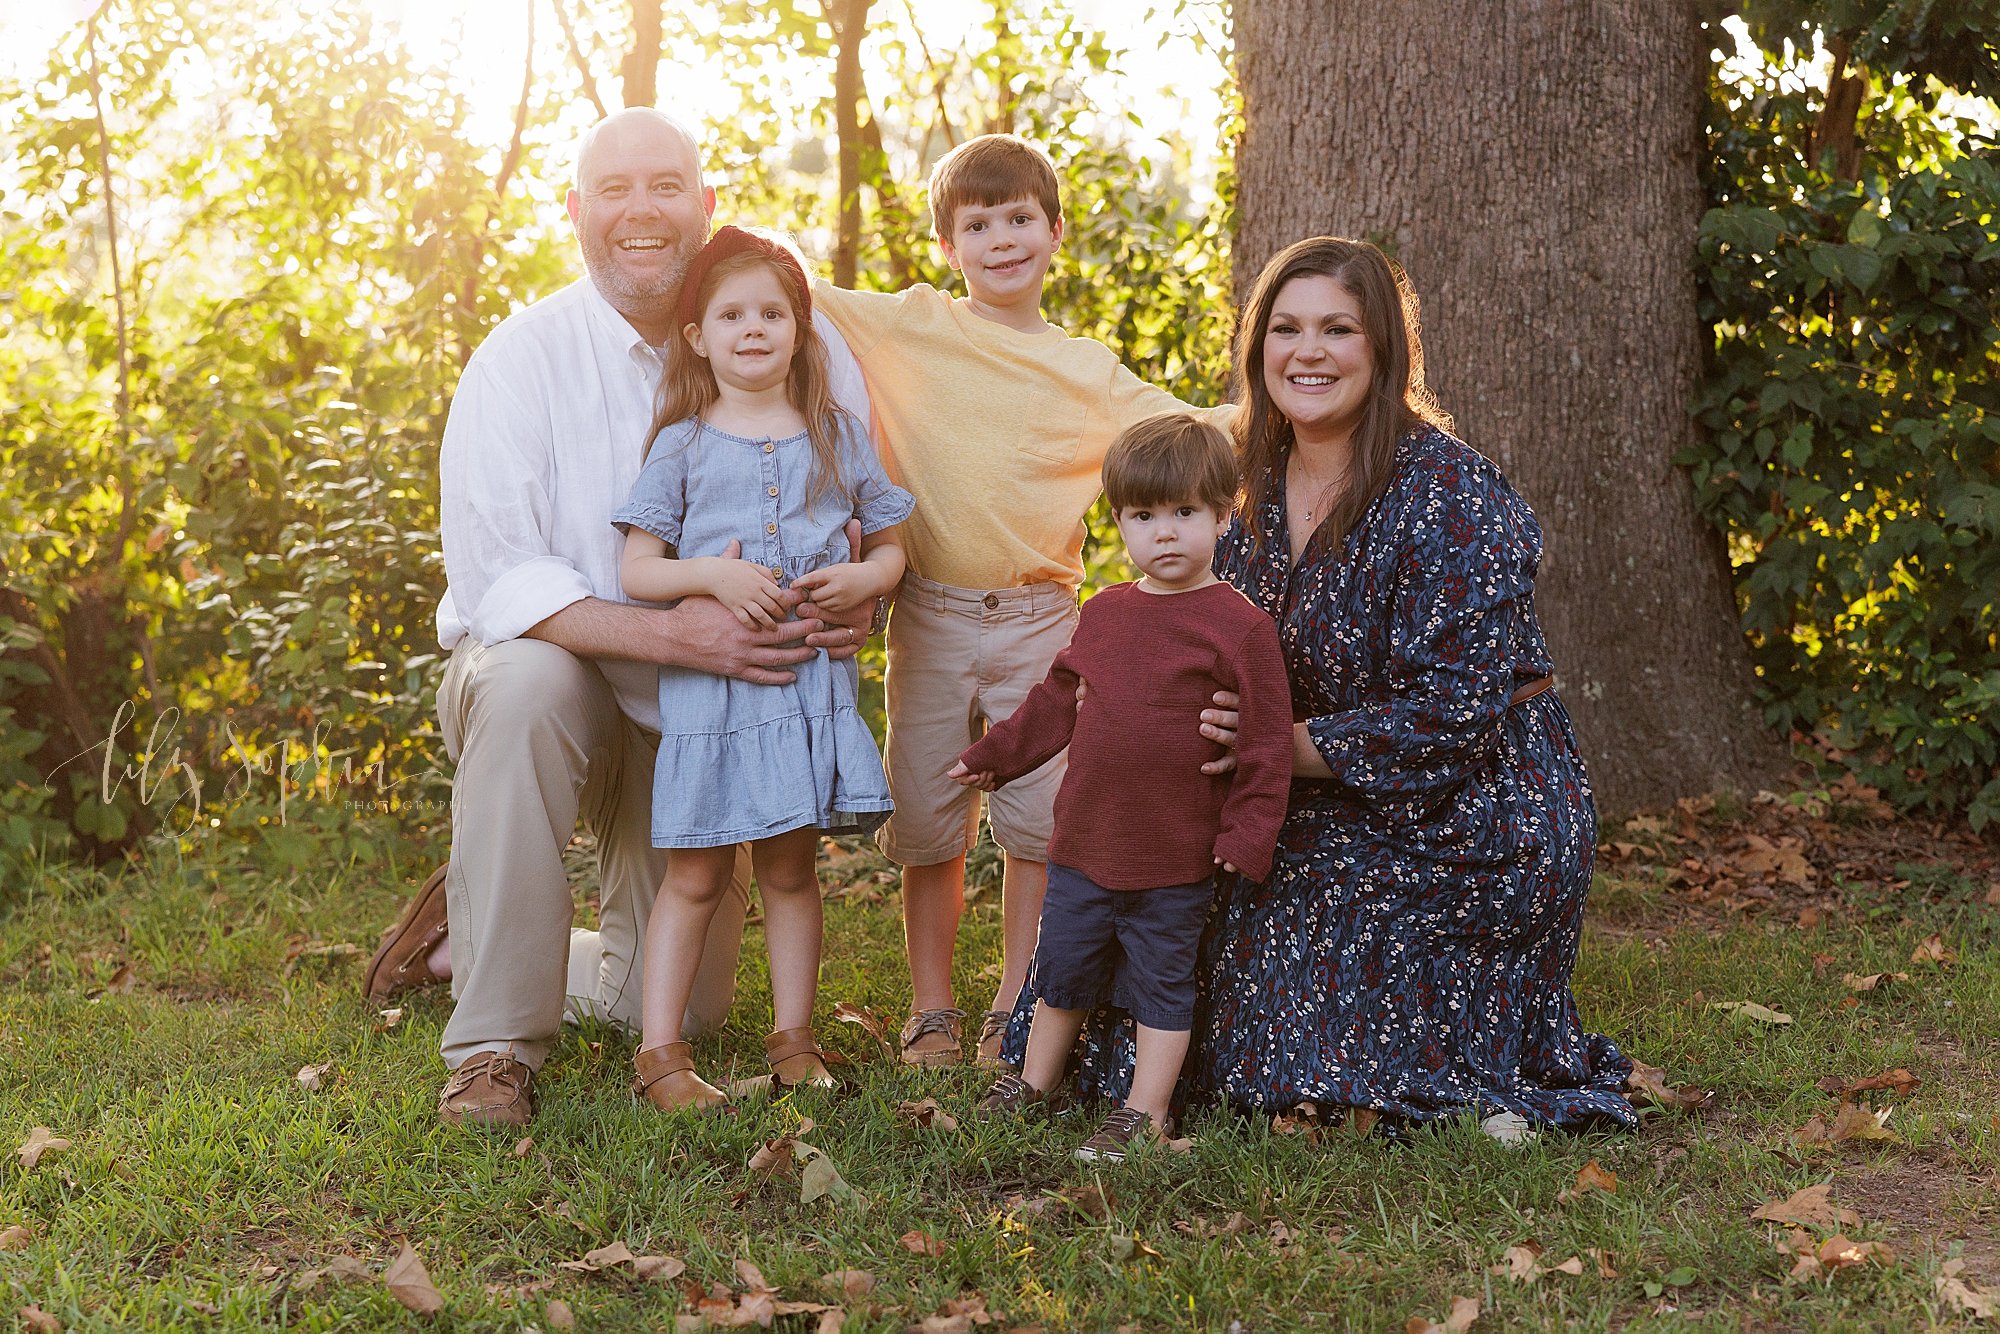 intown-atlanta-decatur-brookhaven-buckhead-outdoor-fall-pictures-family-photoshoot_5536.jpg